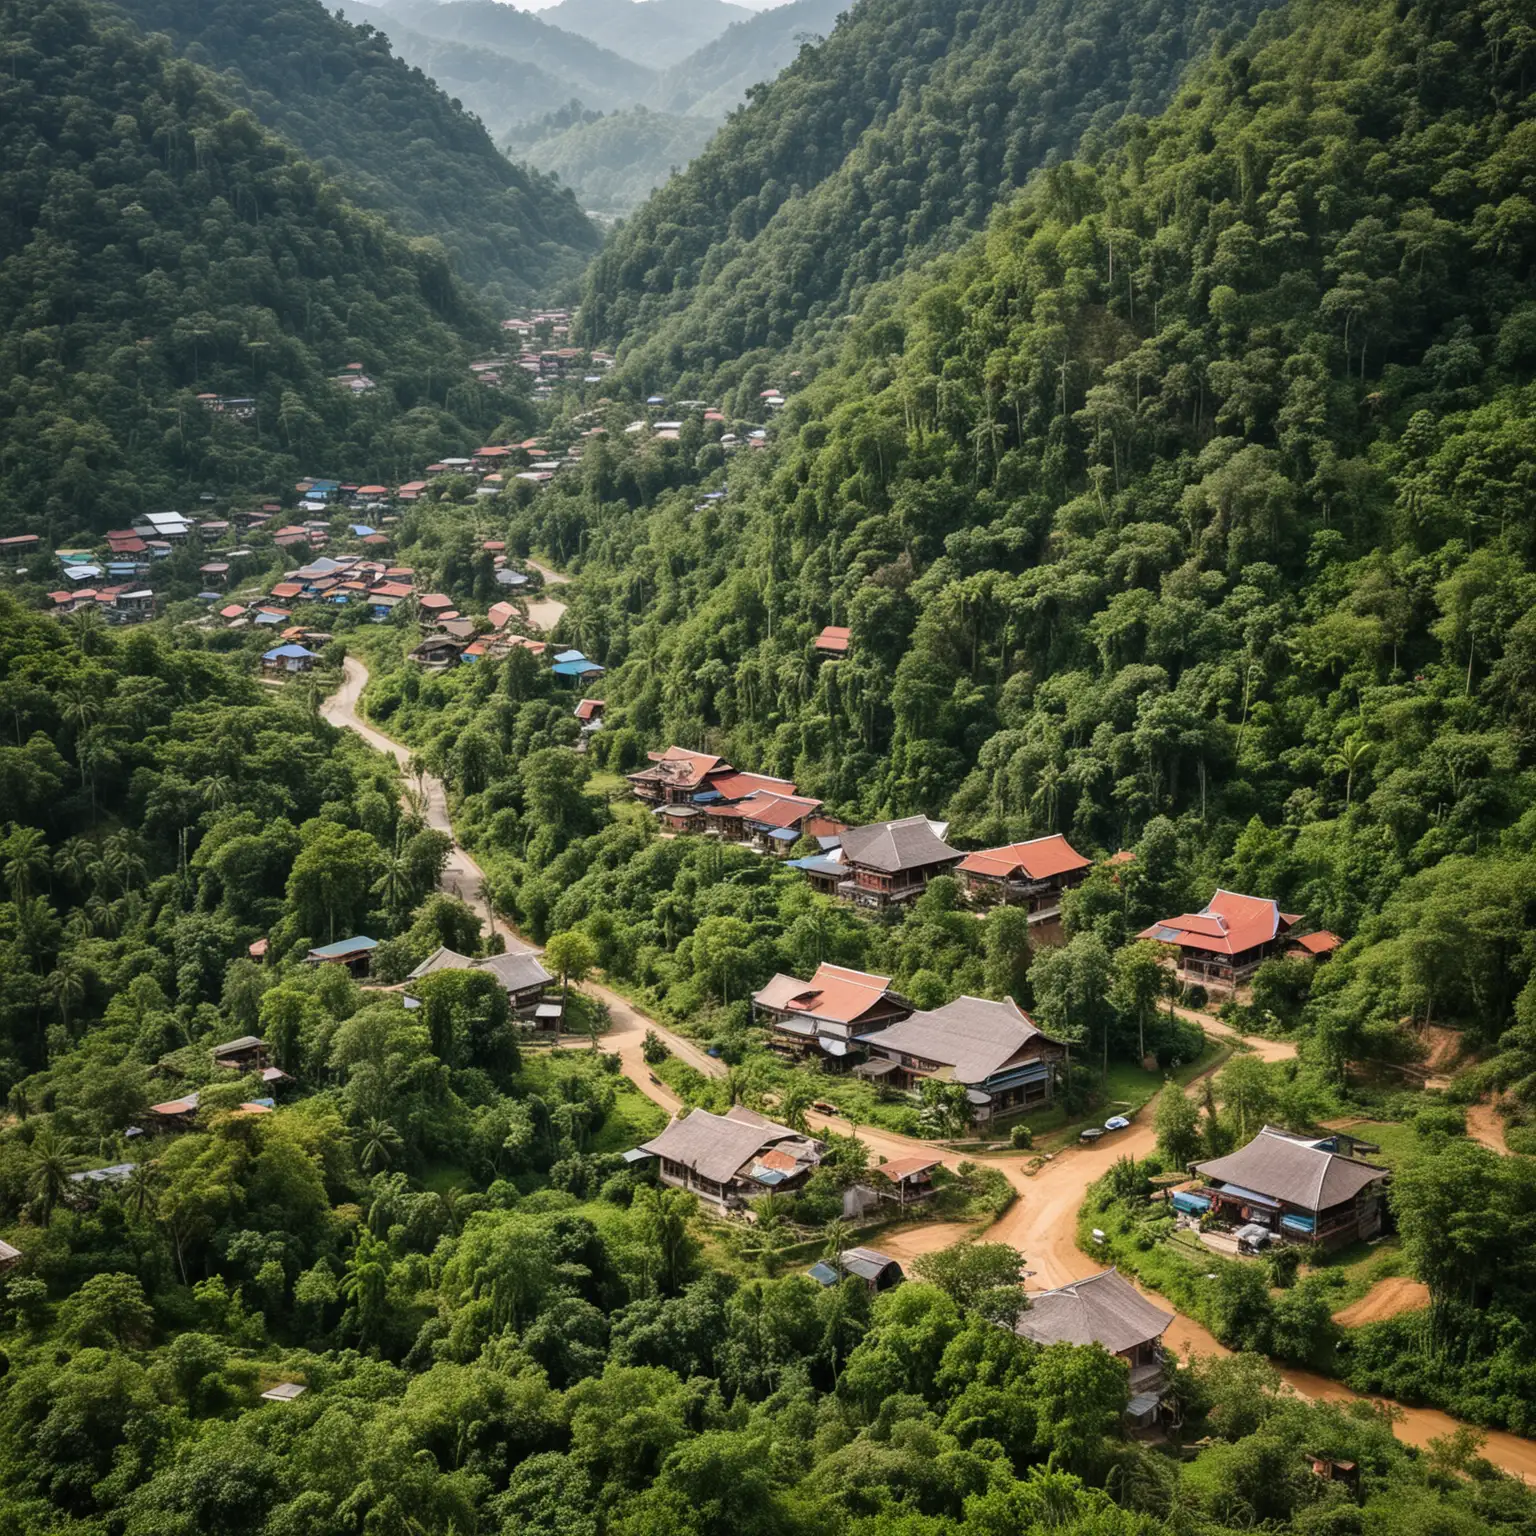 Scenery of a mountain village in northern Thailand It is characterized by lush greenery and a peaceful environment.